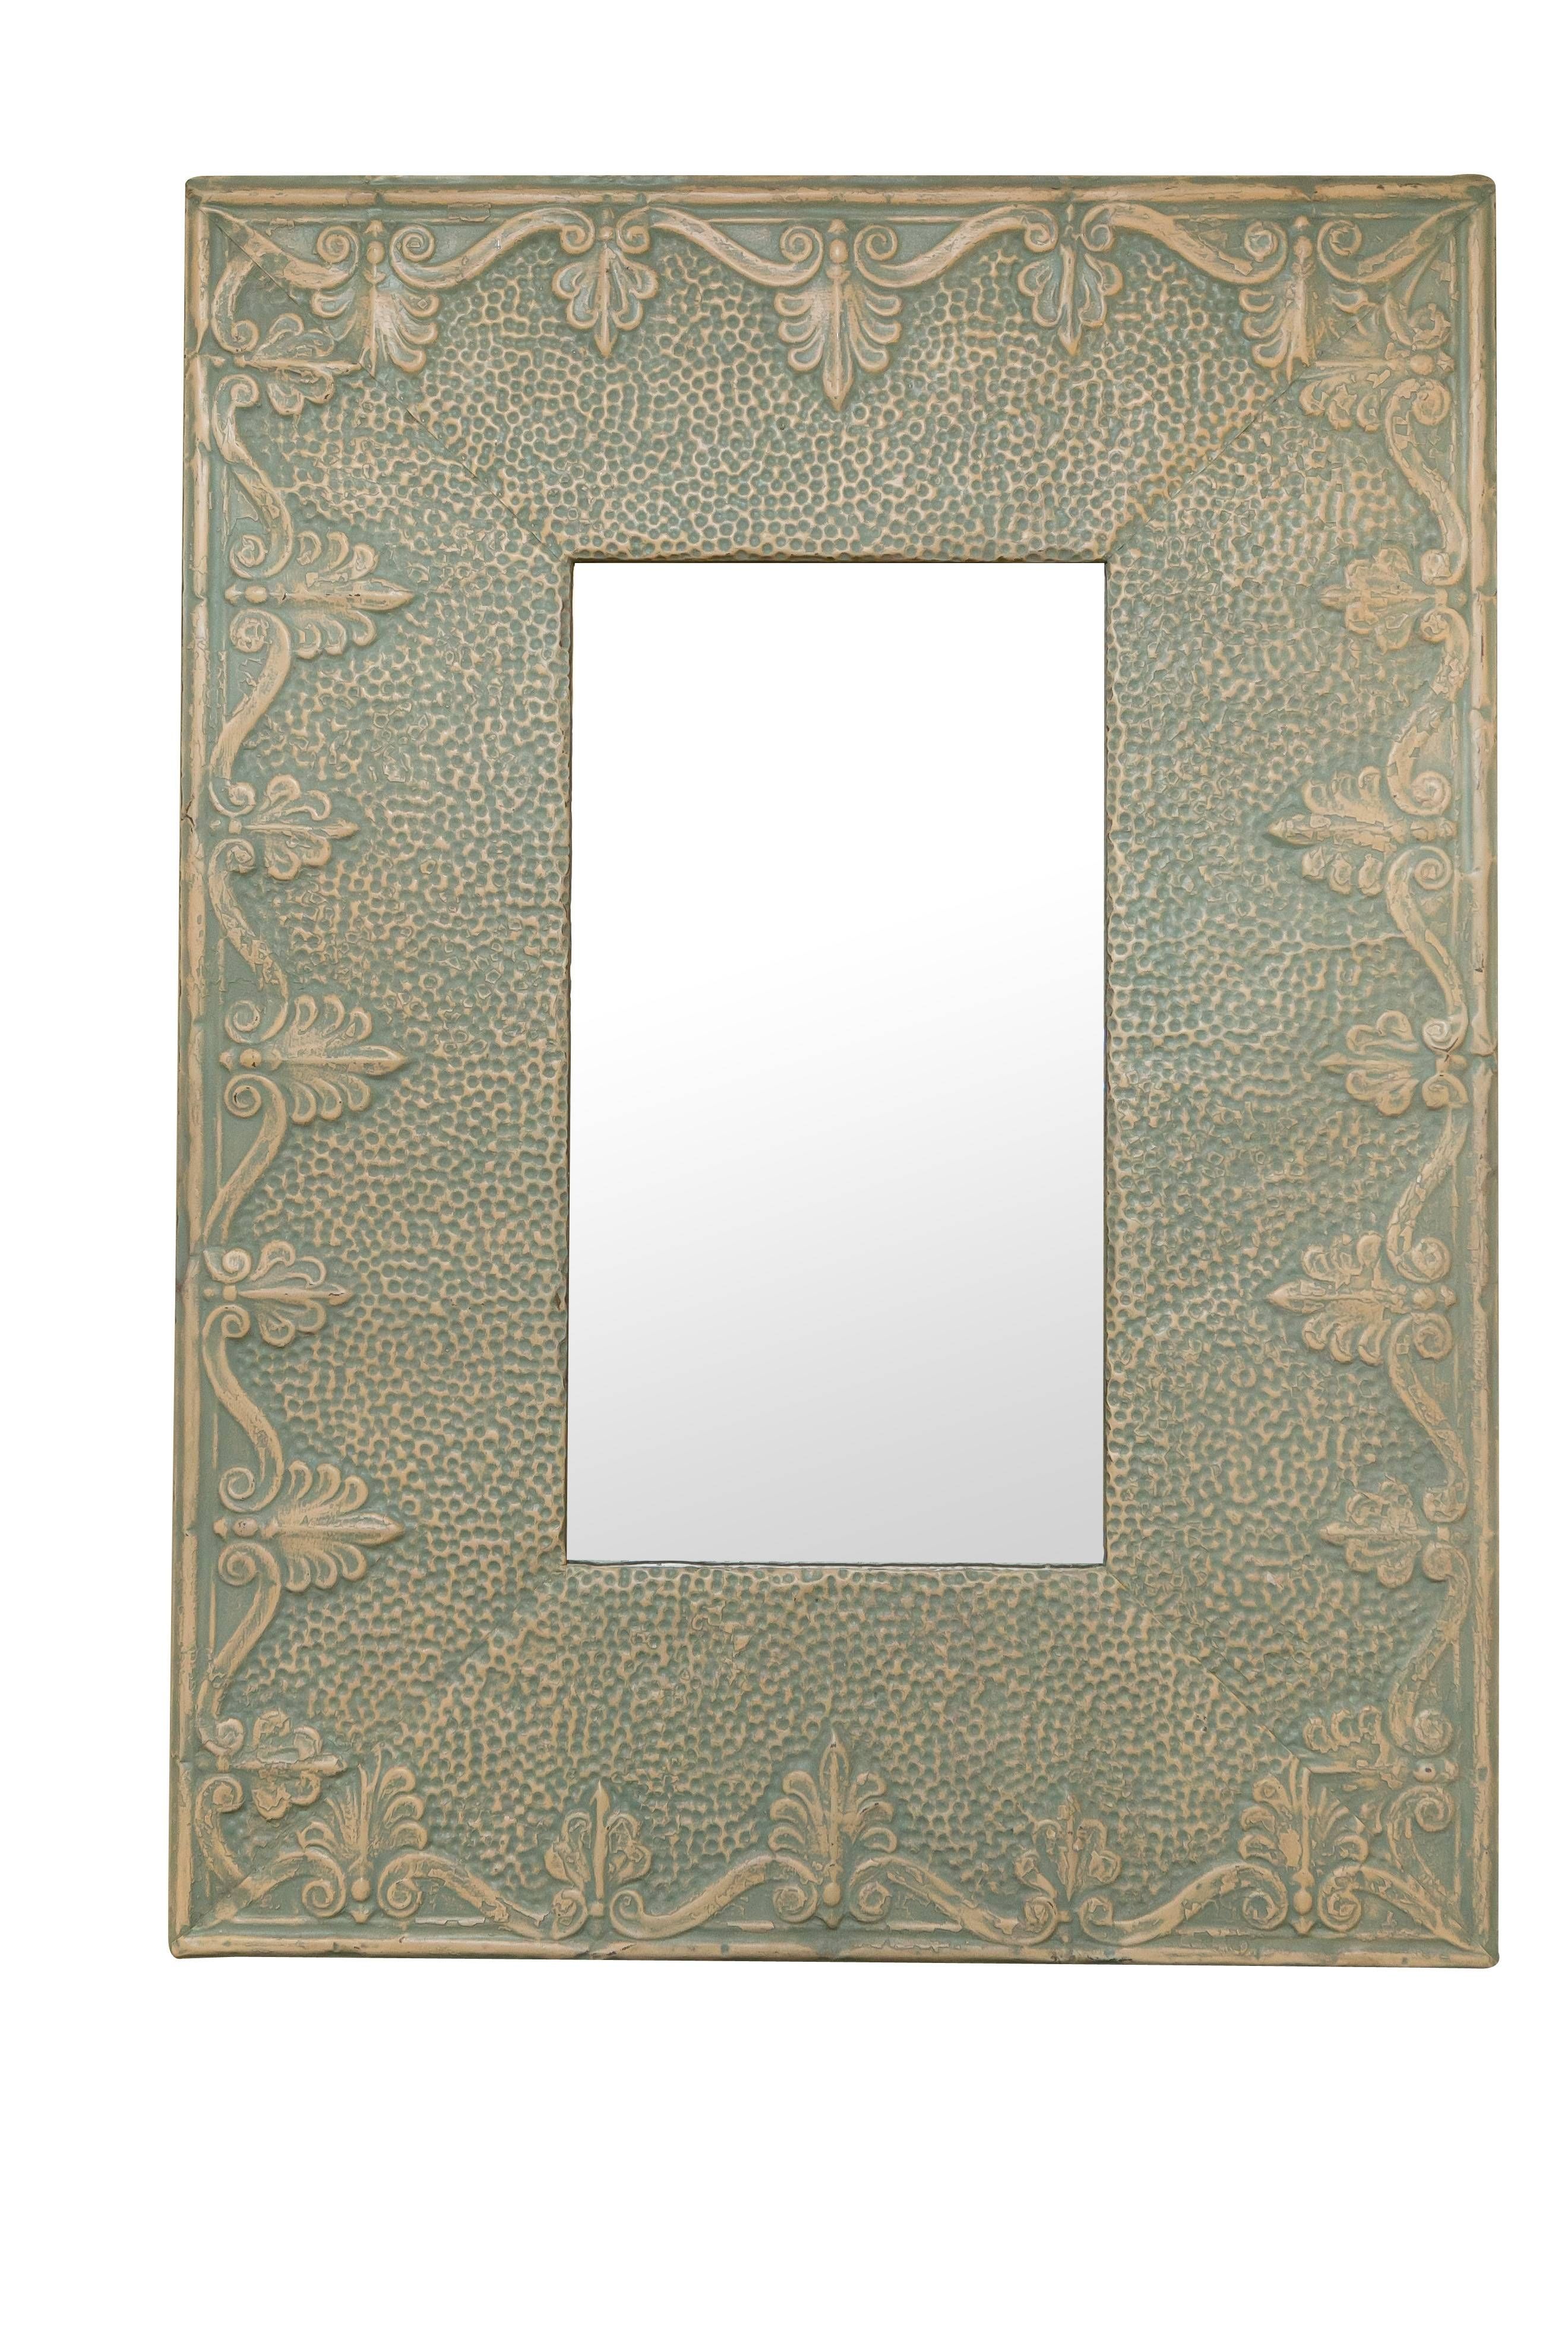 Lofty Design Ideas Antique Bathroom Mirror Best 25 Vintage Mirrors Intended For Vintage Looking Mirrors (View 13 of 25)